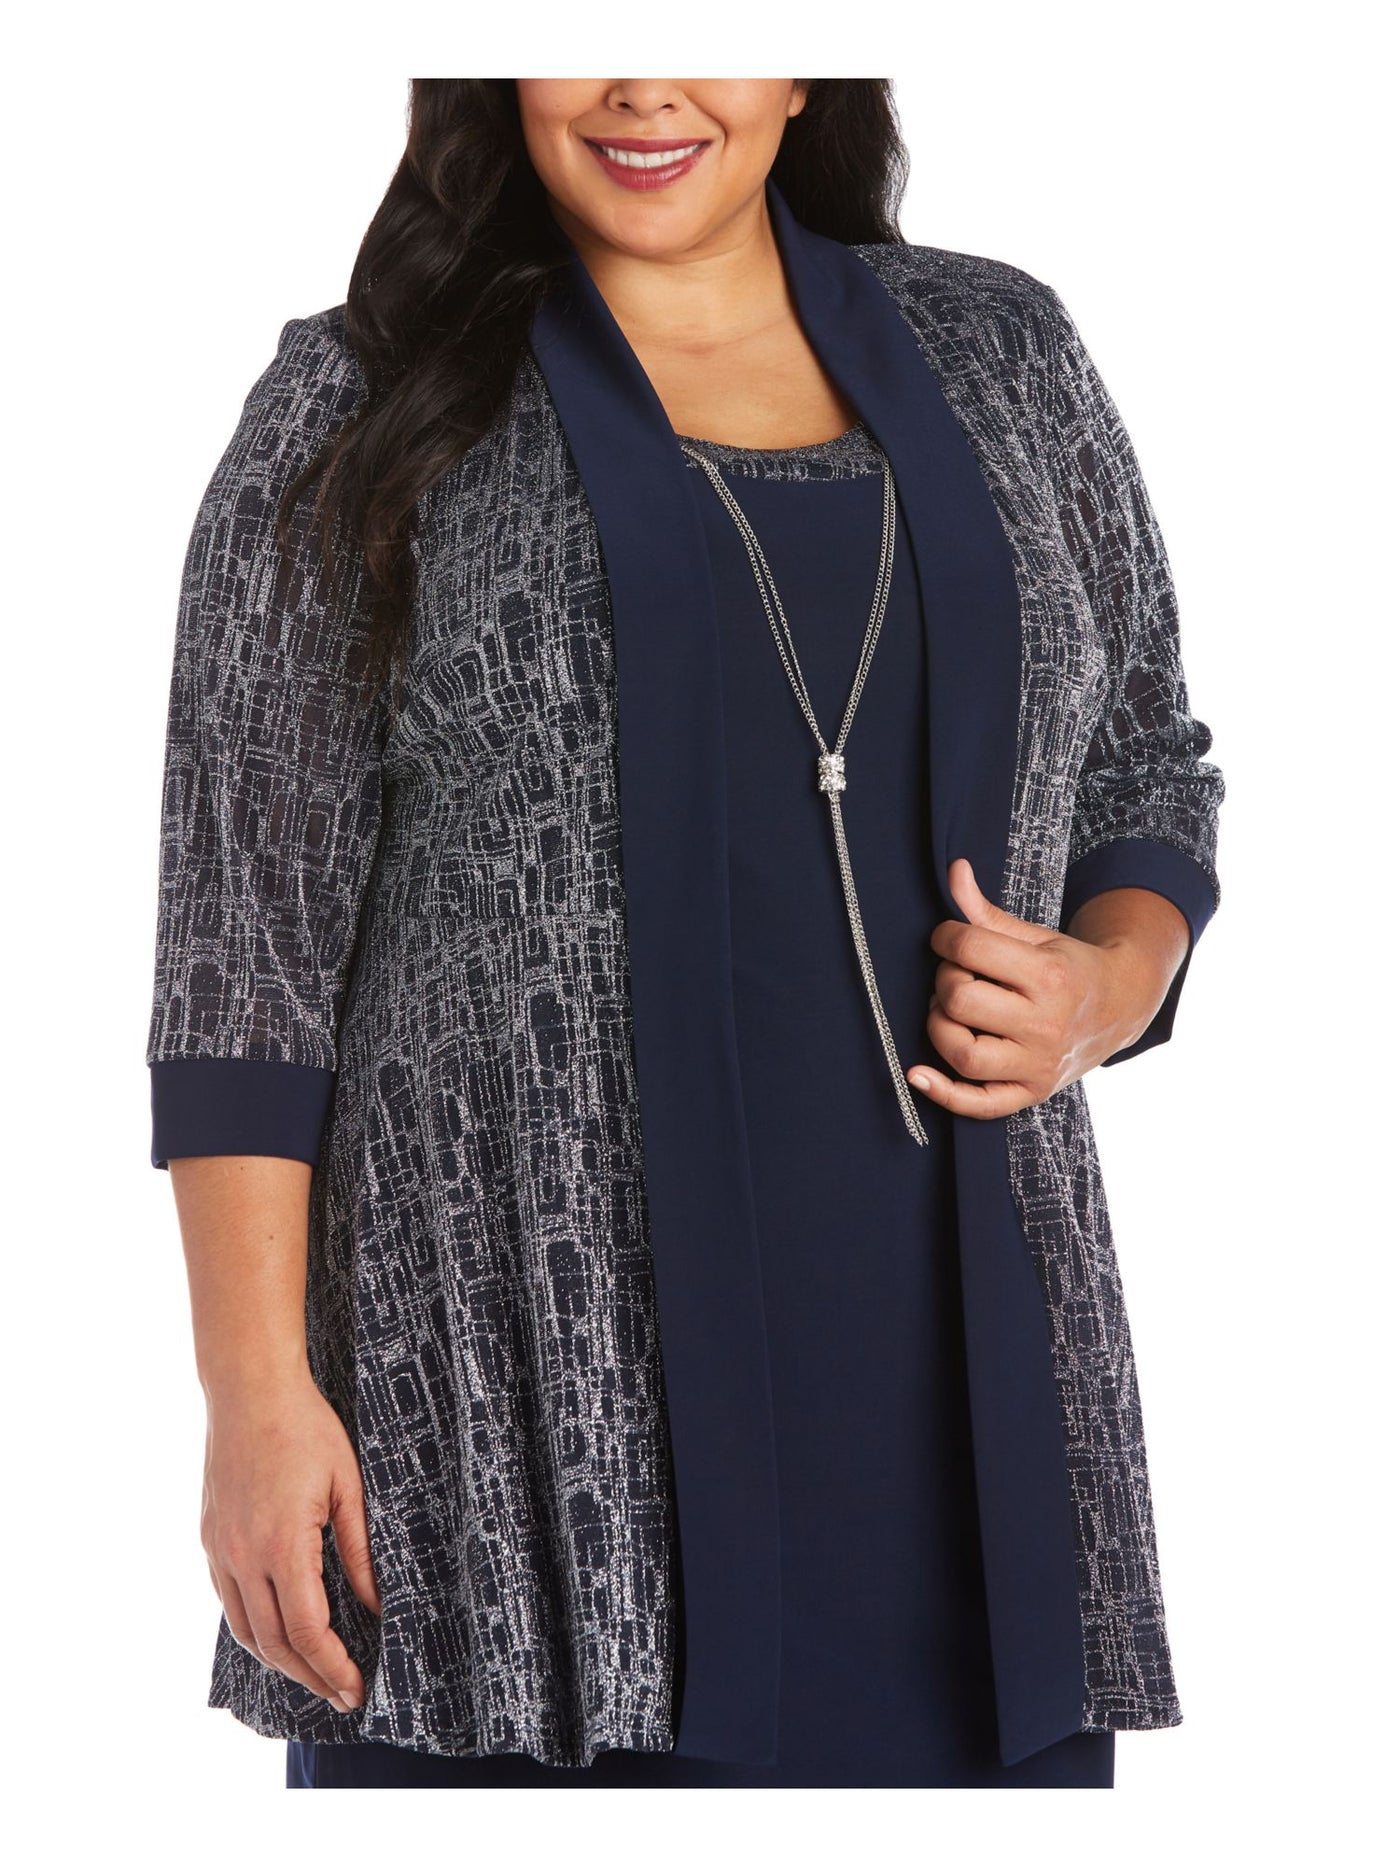 R&M RICHARDS WOMAN Womens Navy Sheer 3/4 Sleeve Open Front Wear To Work Cardigan Plus 22W